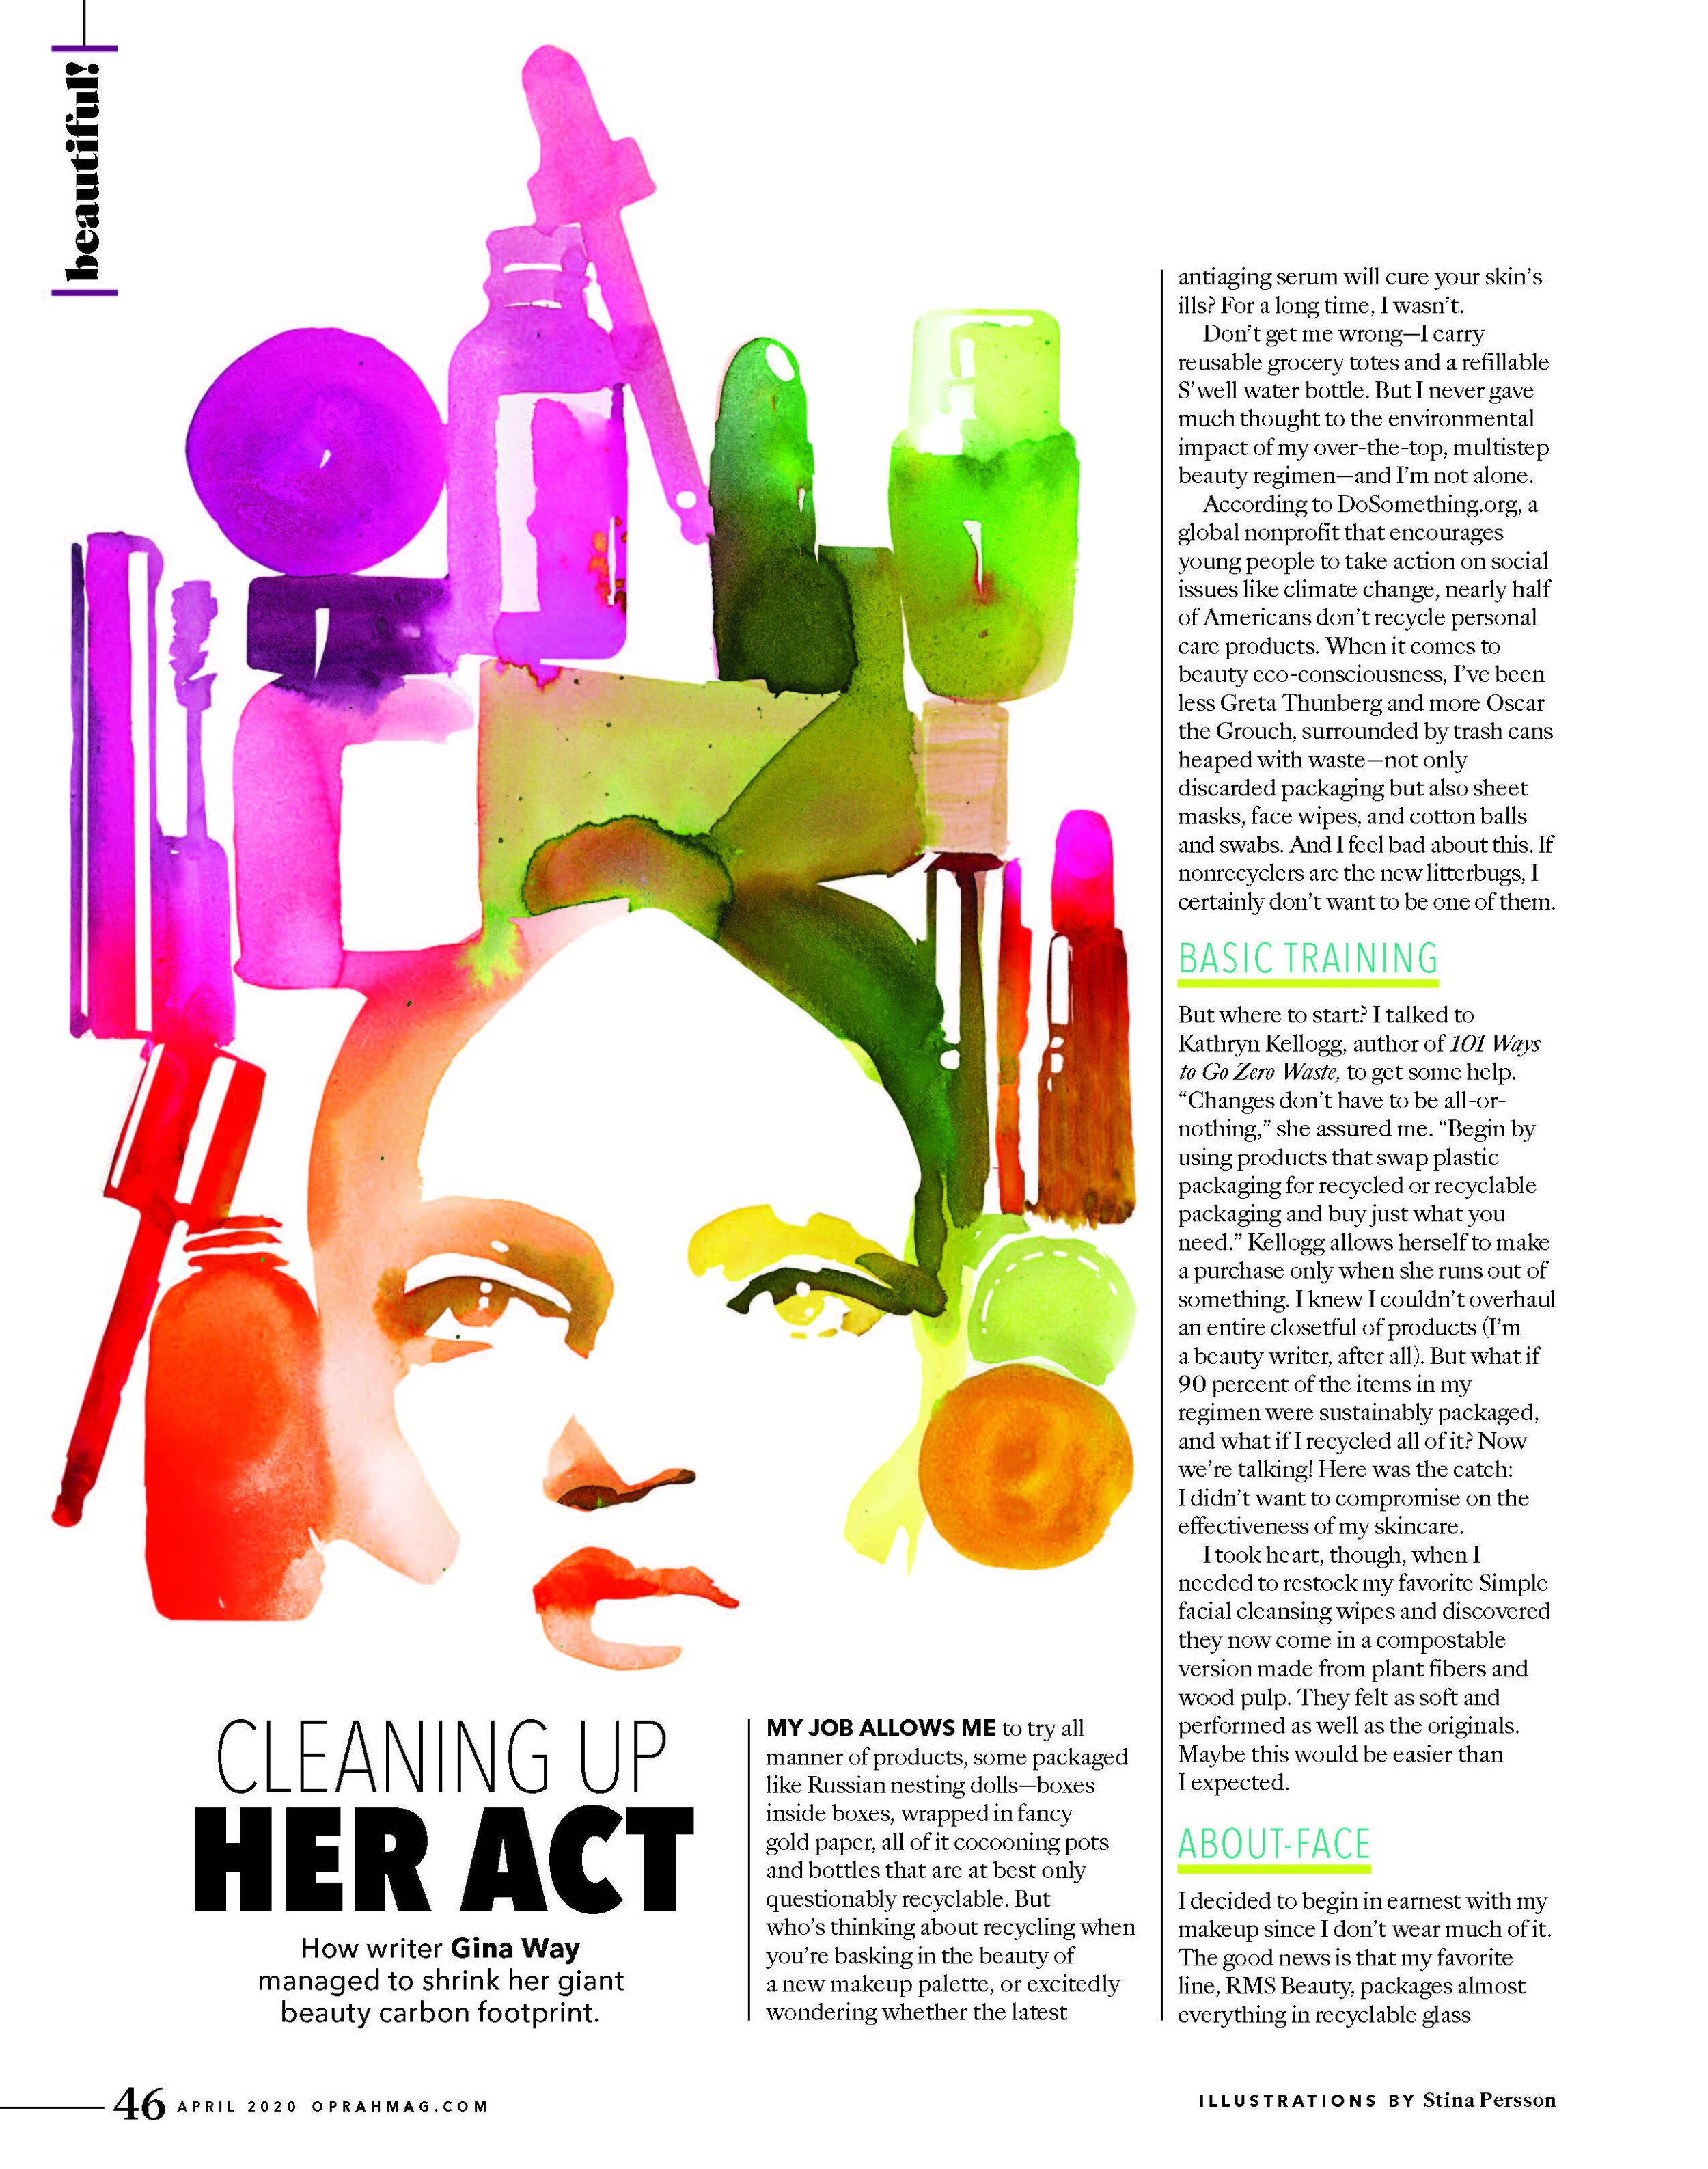 Cleaning Up Her Act - O Mag pdf_Page_1.jpg